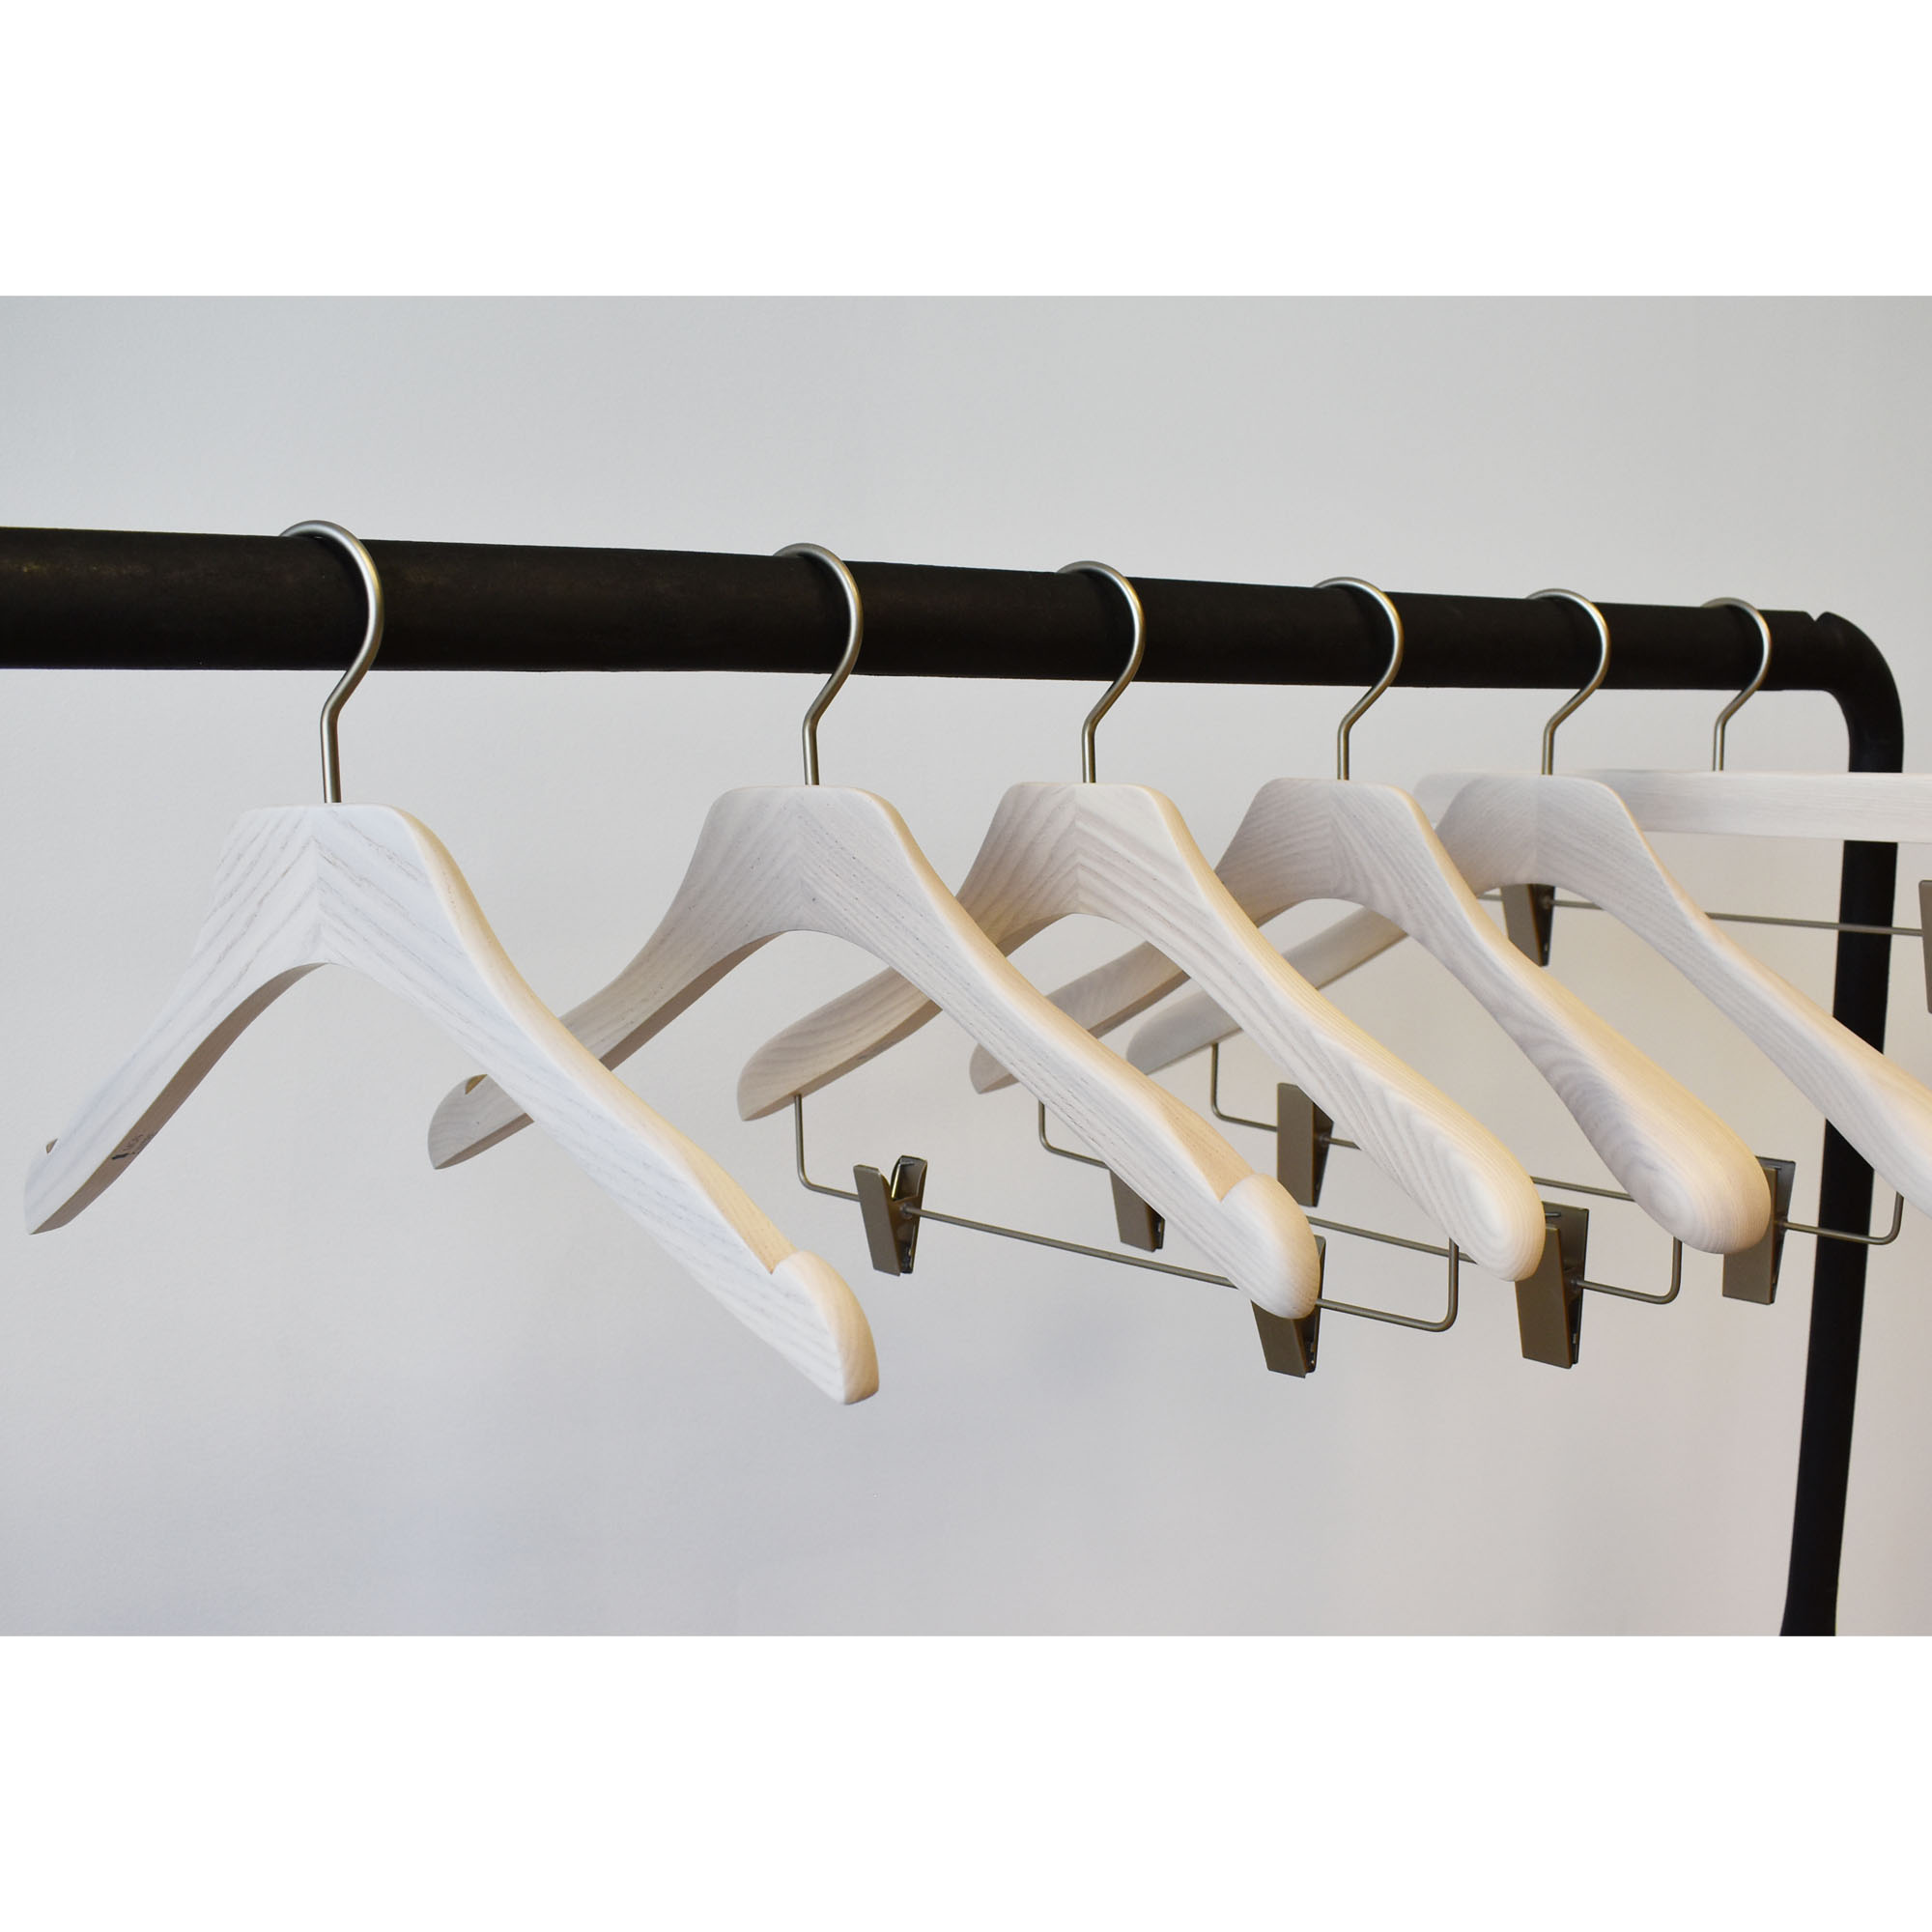 Wooden hangers with notches for dresses